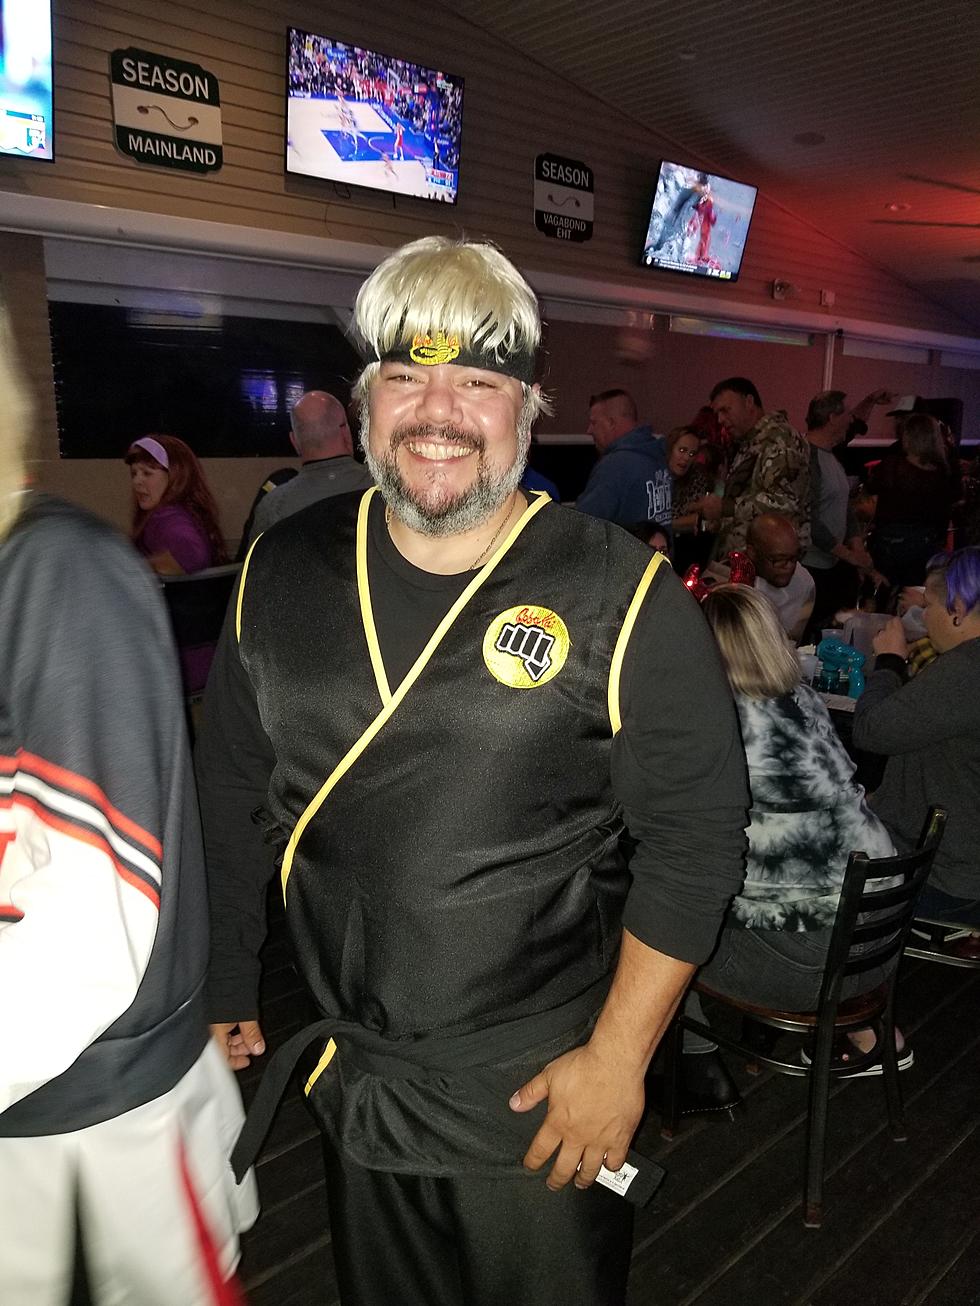 South Jersey Shows Off Halloween Costumes at Vagabond in Egg Harbor Twp, NJ